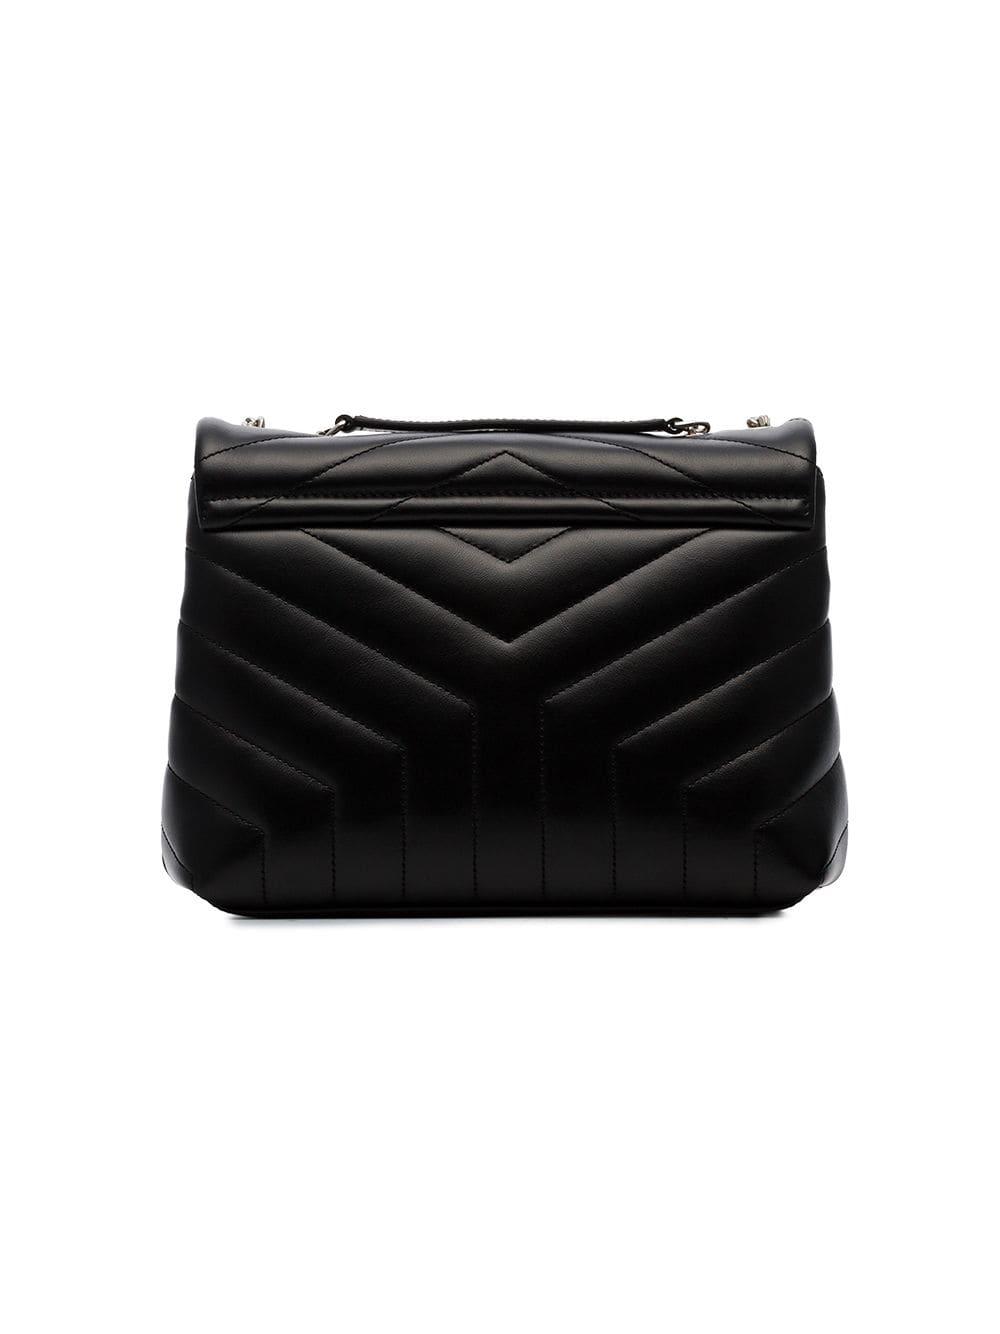 Saint Laurent Black Loulou Small Quilted Leather Crossbody Bag in Black - Lyst